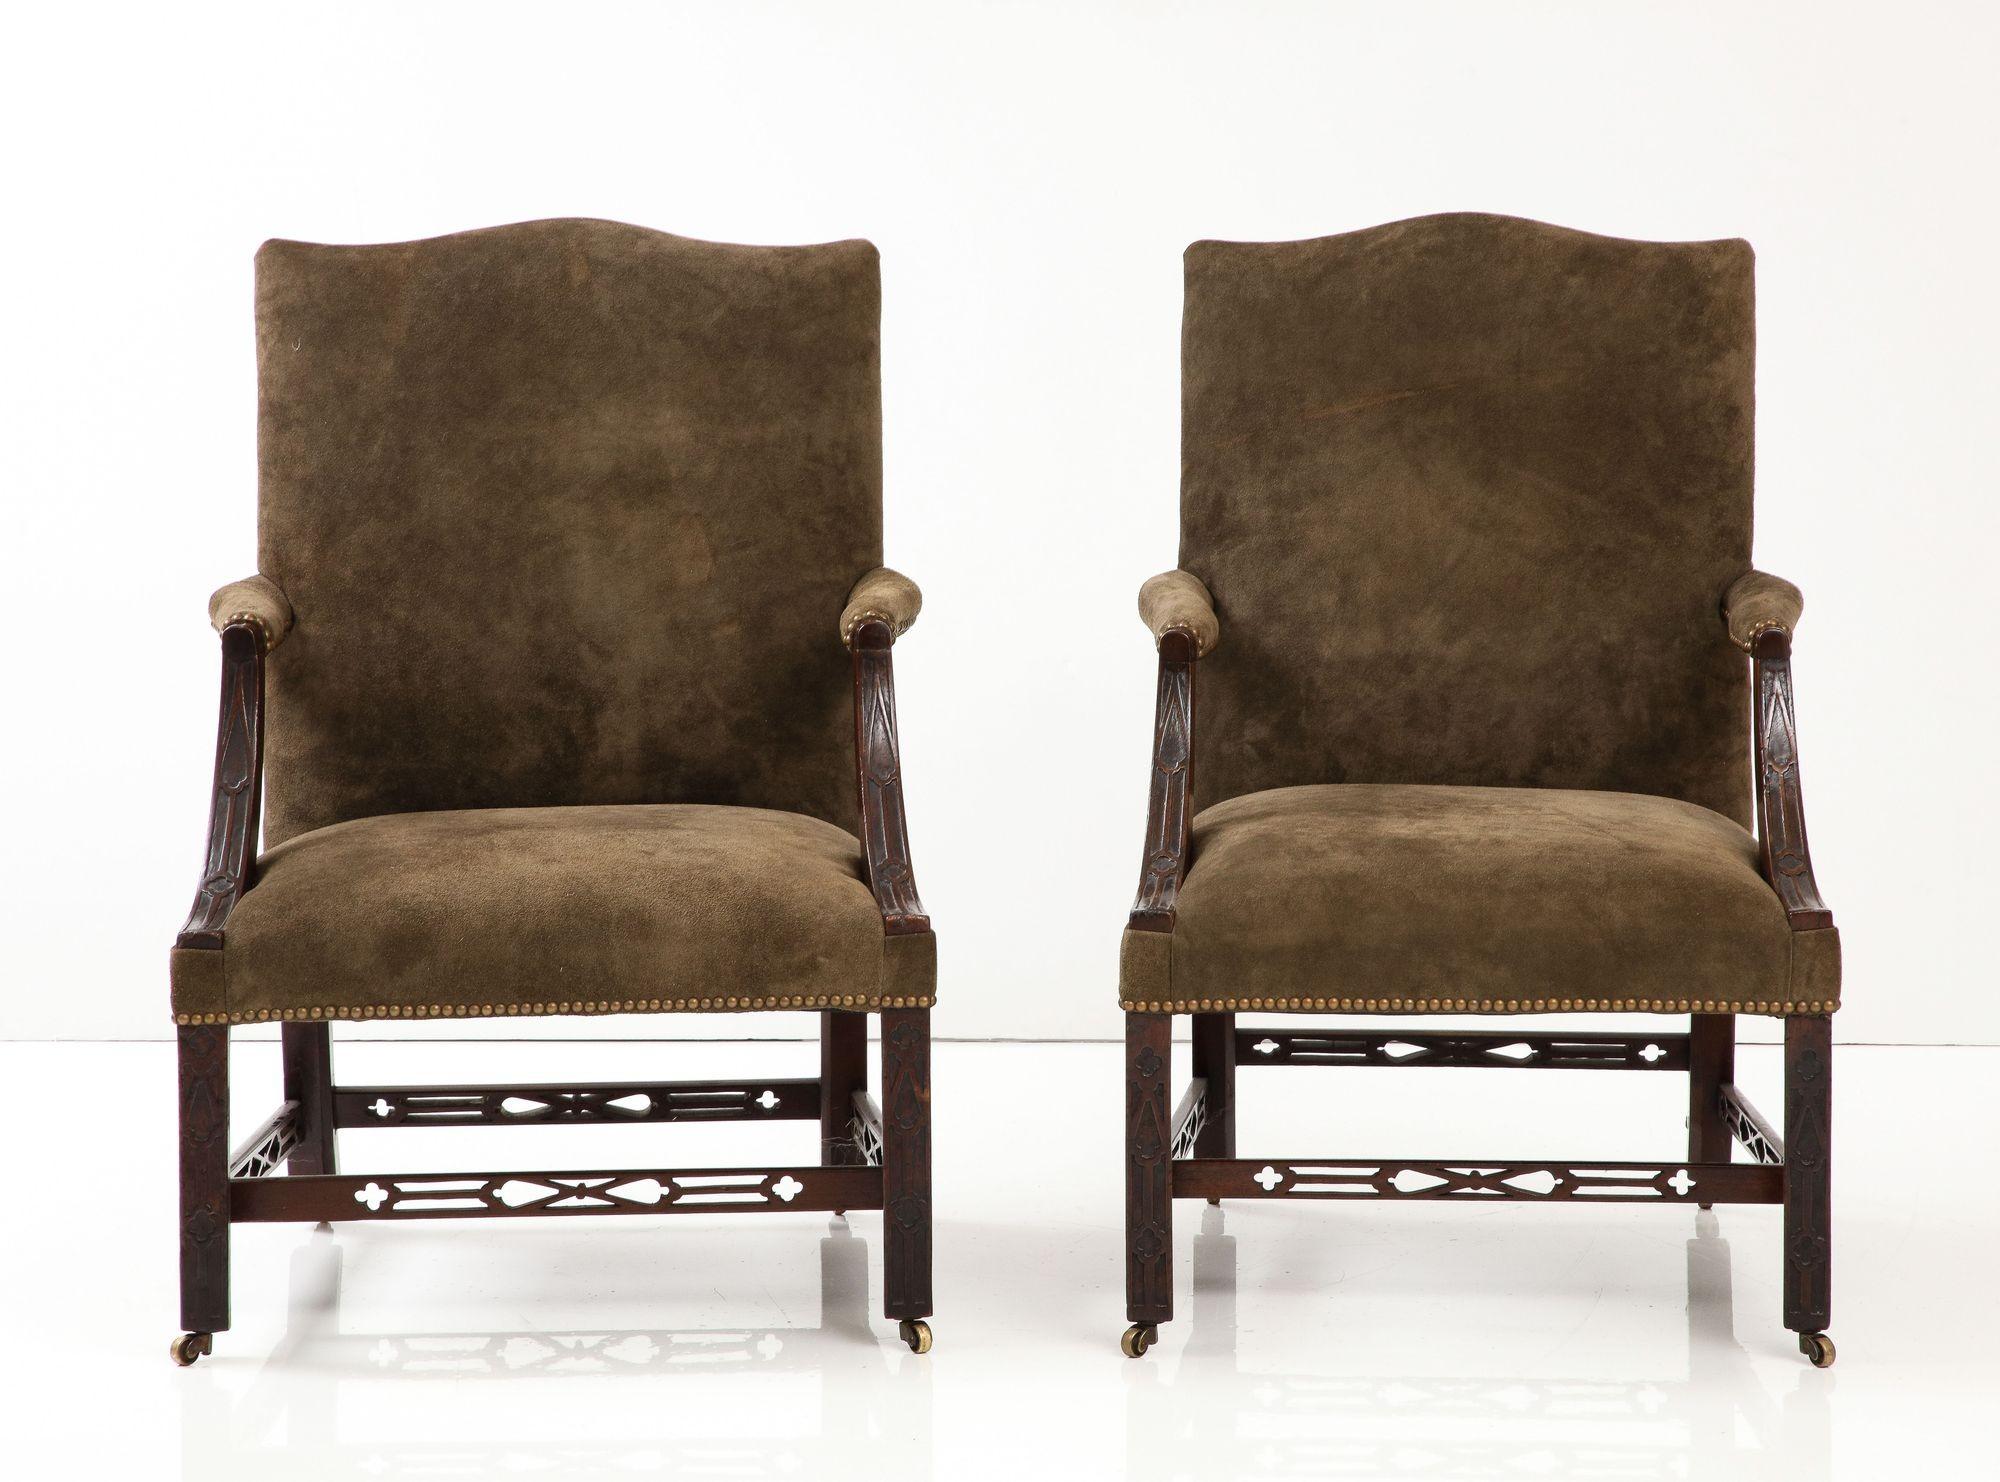 Carved Matched Pair of George III Gainsborough Chairs For Sale